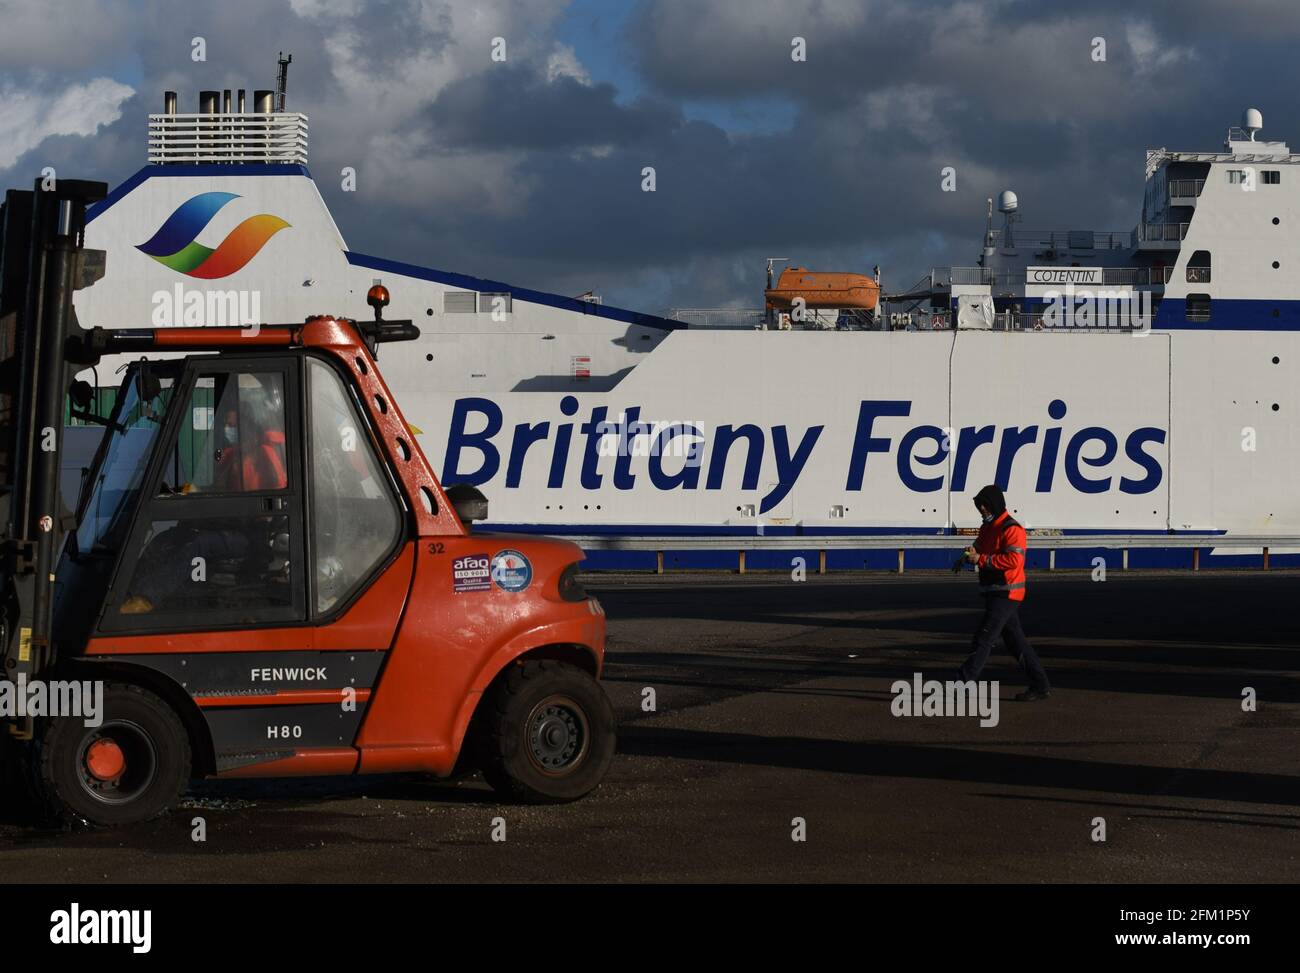 *** STRICTLY NO SALES TO FRENCH MEDIA OR PUBLISHERS - RIGHTS RESERVED ***February 18, 2021 - Cherbourg, France: French dockers prepare to unload a freight ferry from Ireland at the Cherbourg harbour. Officials at the Normandy port of Cherbourg reported that their business tripled since Brexit led to a surge in direct traffic between the European Union and the island of Ireland. Freight ferries take 17 hours to cross the sea between France and Ireland. Stock Photo